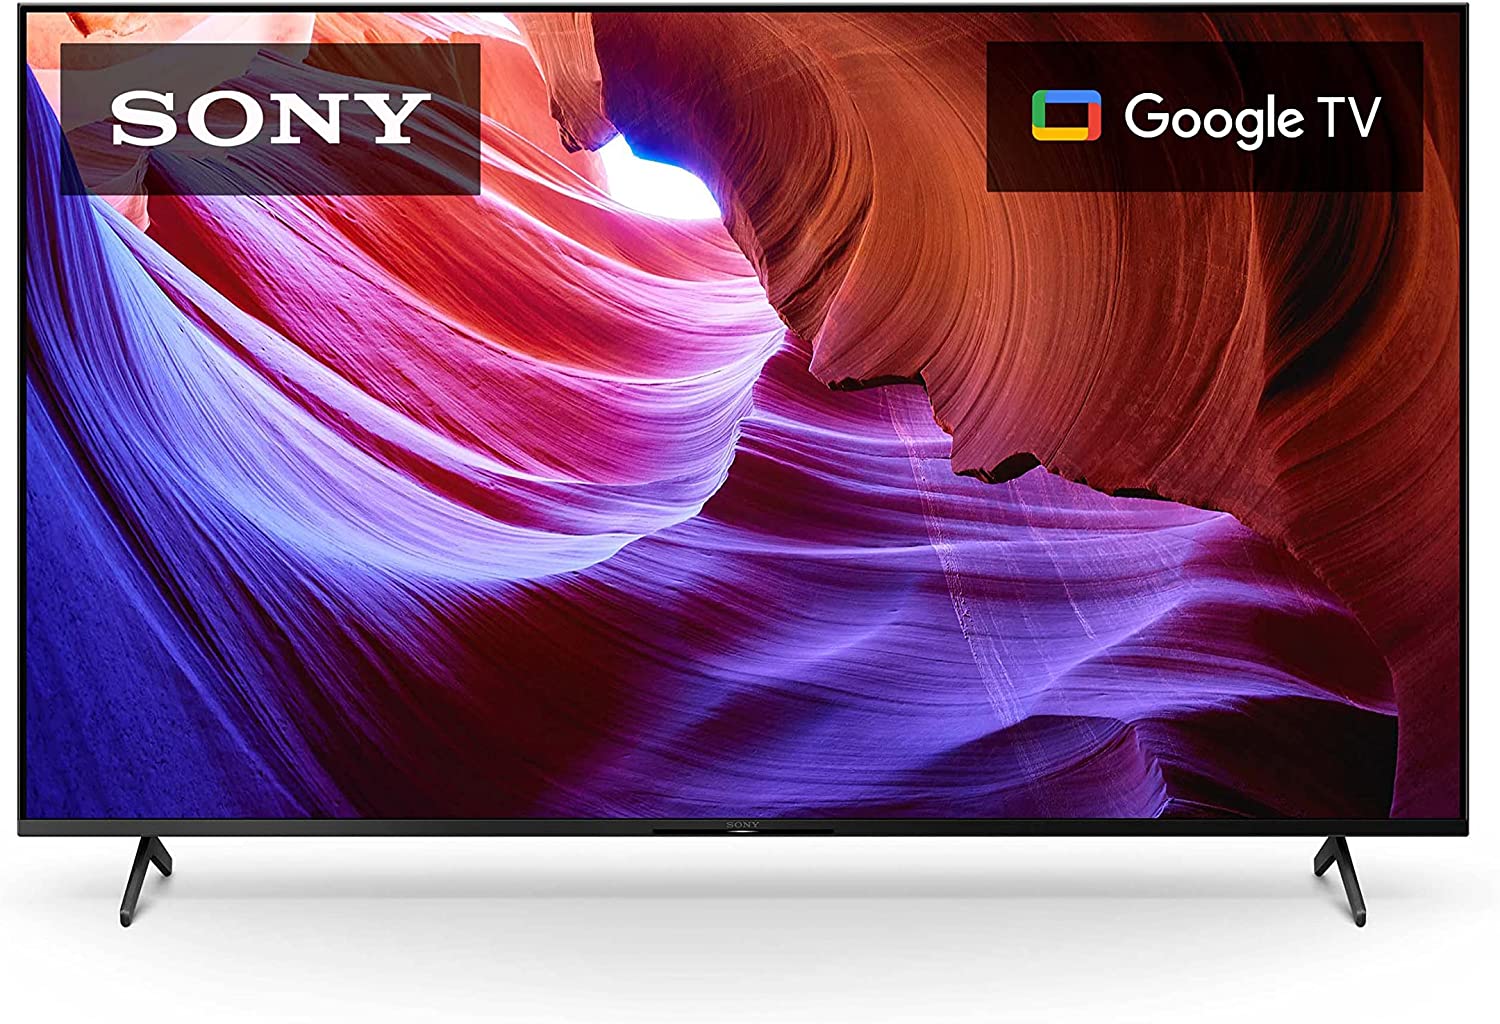 Sony 43 Inch 4K Ultra HD TV X85K Series: LED Smart Google TV with Dolby Vision HDR and Native 120HZ Refresh Rate KD43X85K- 2022 Model